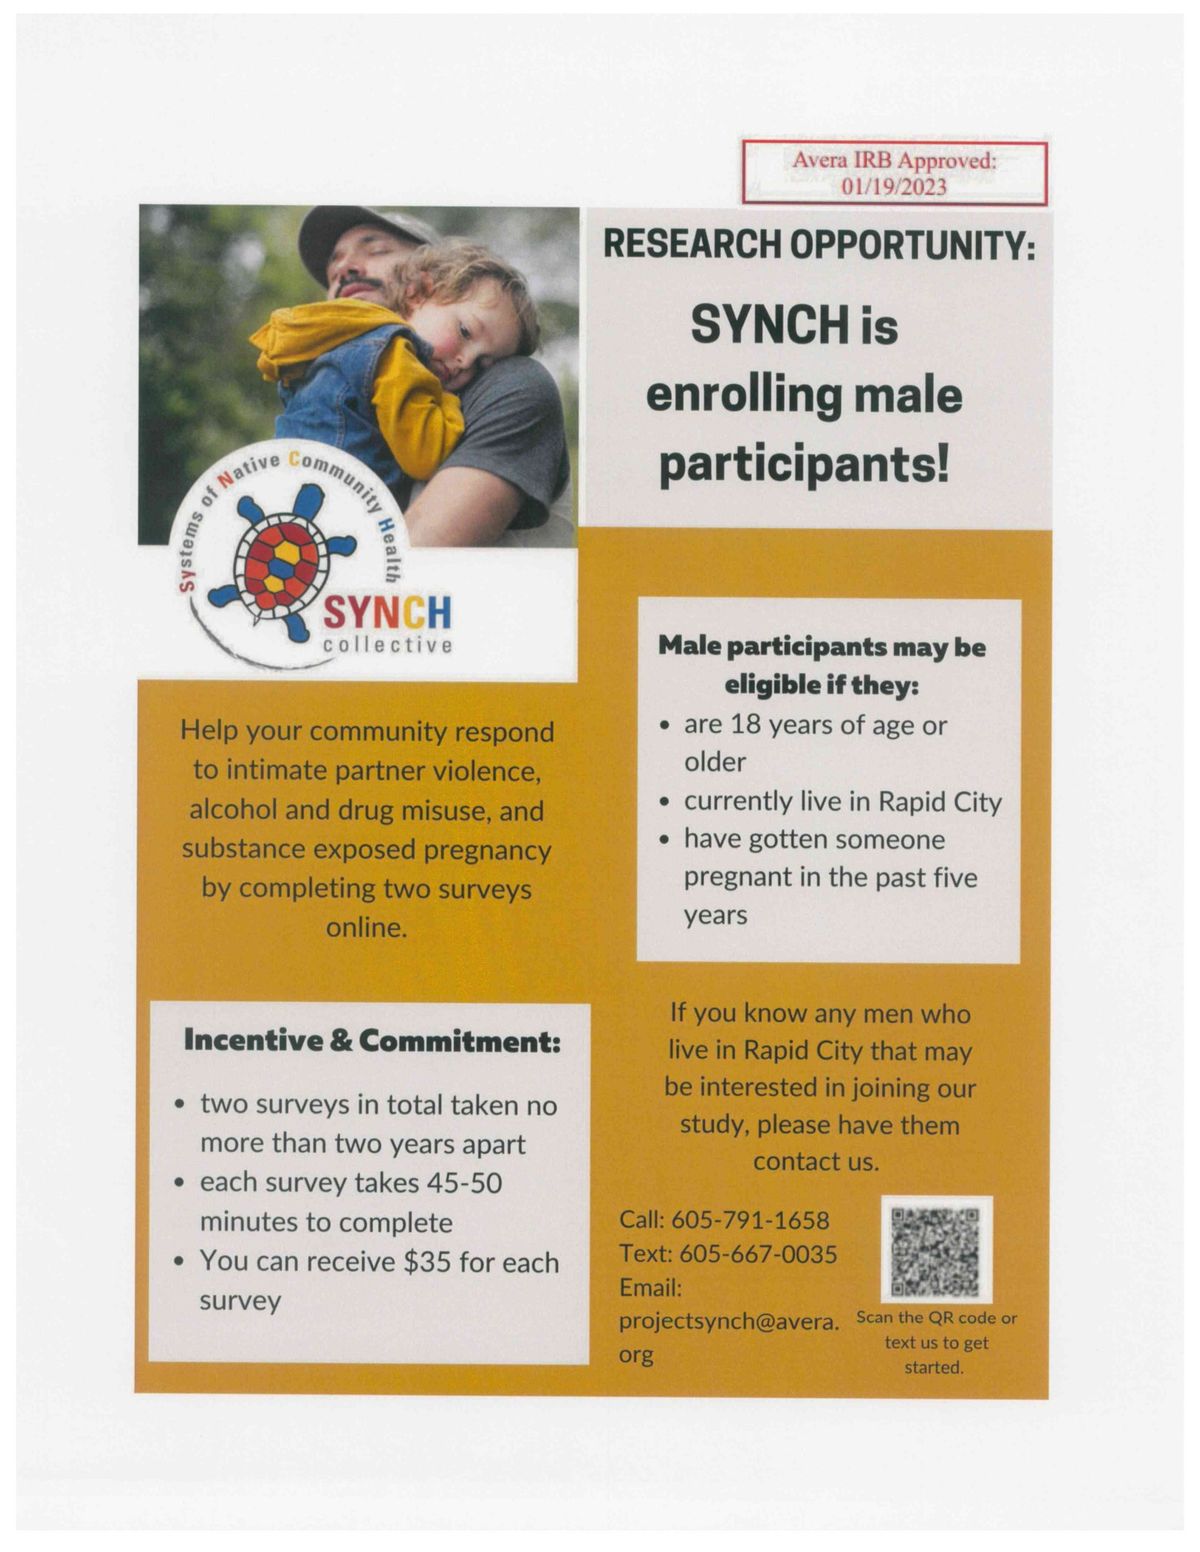 SYNCH Collective Research Opportunity